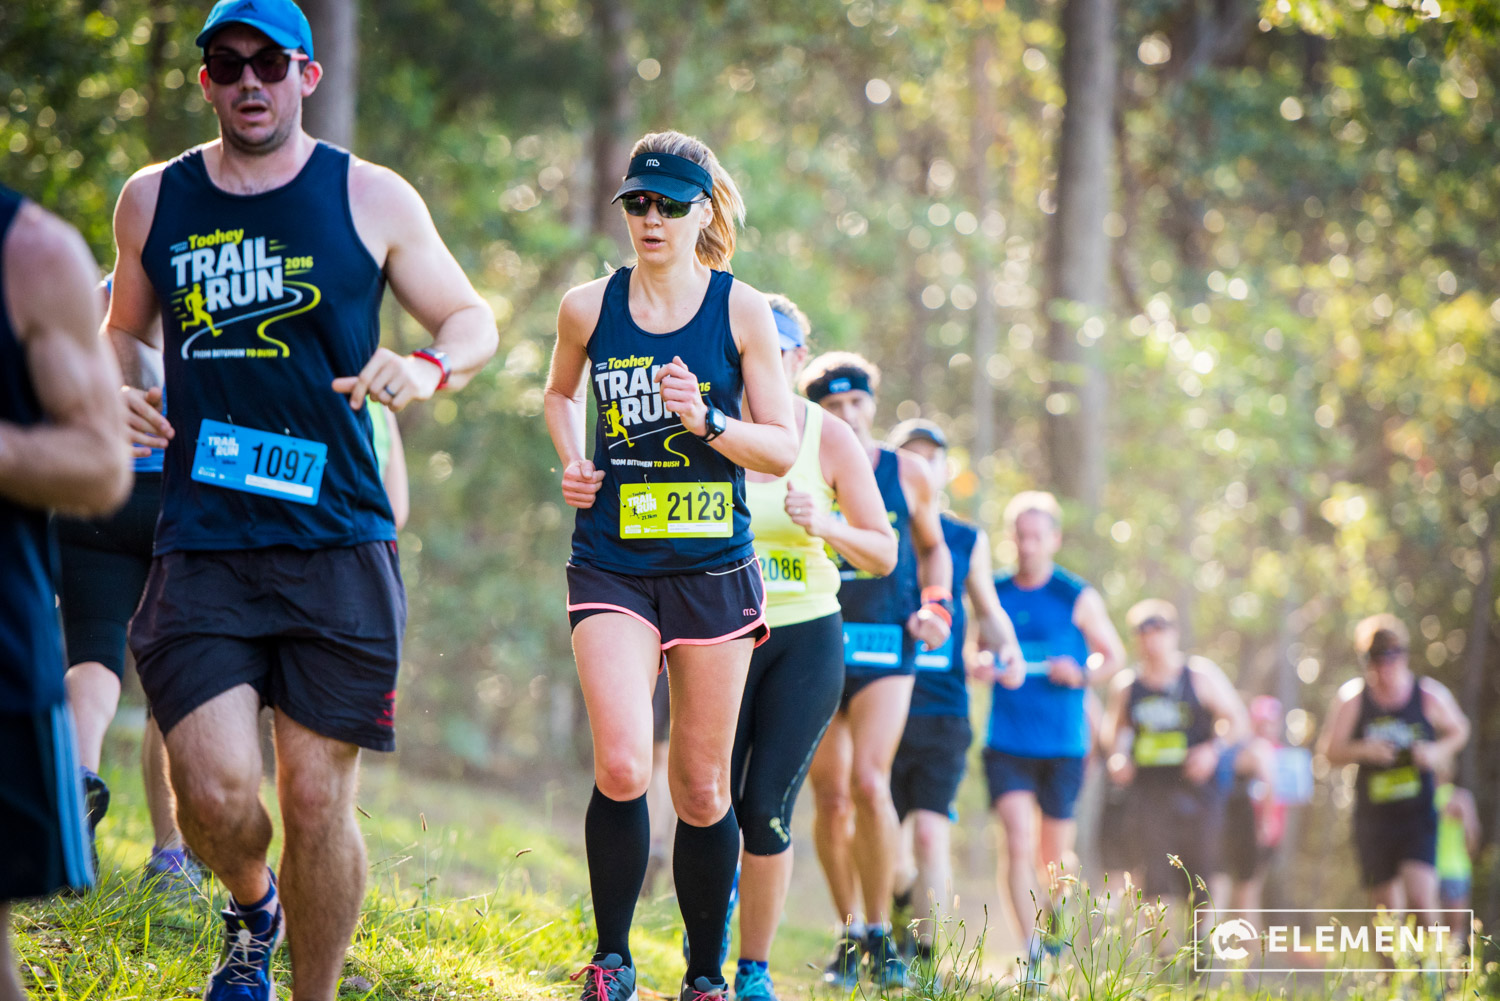 Photos from the Toohey Trail Run, 9-10-2016. Photos by Element.